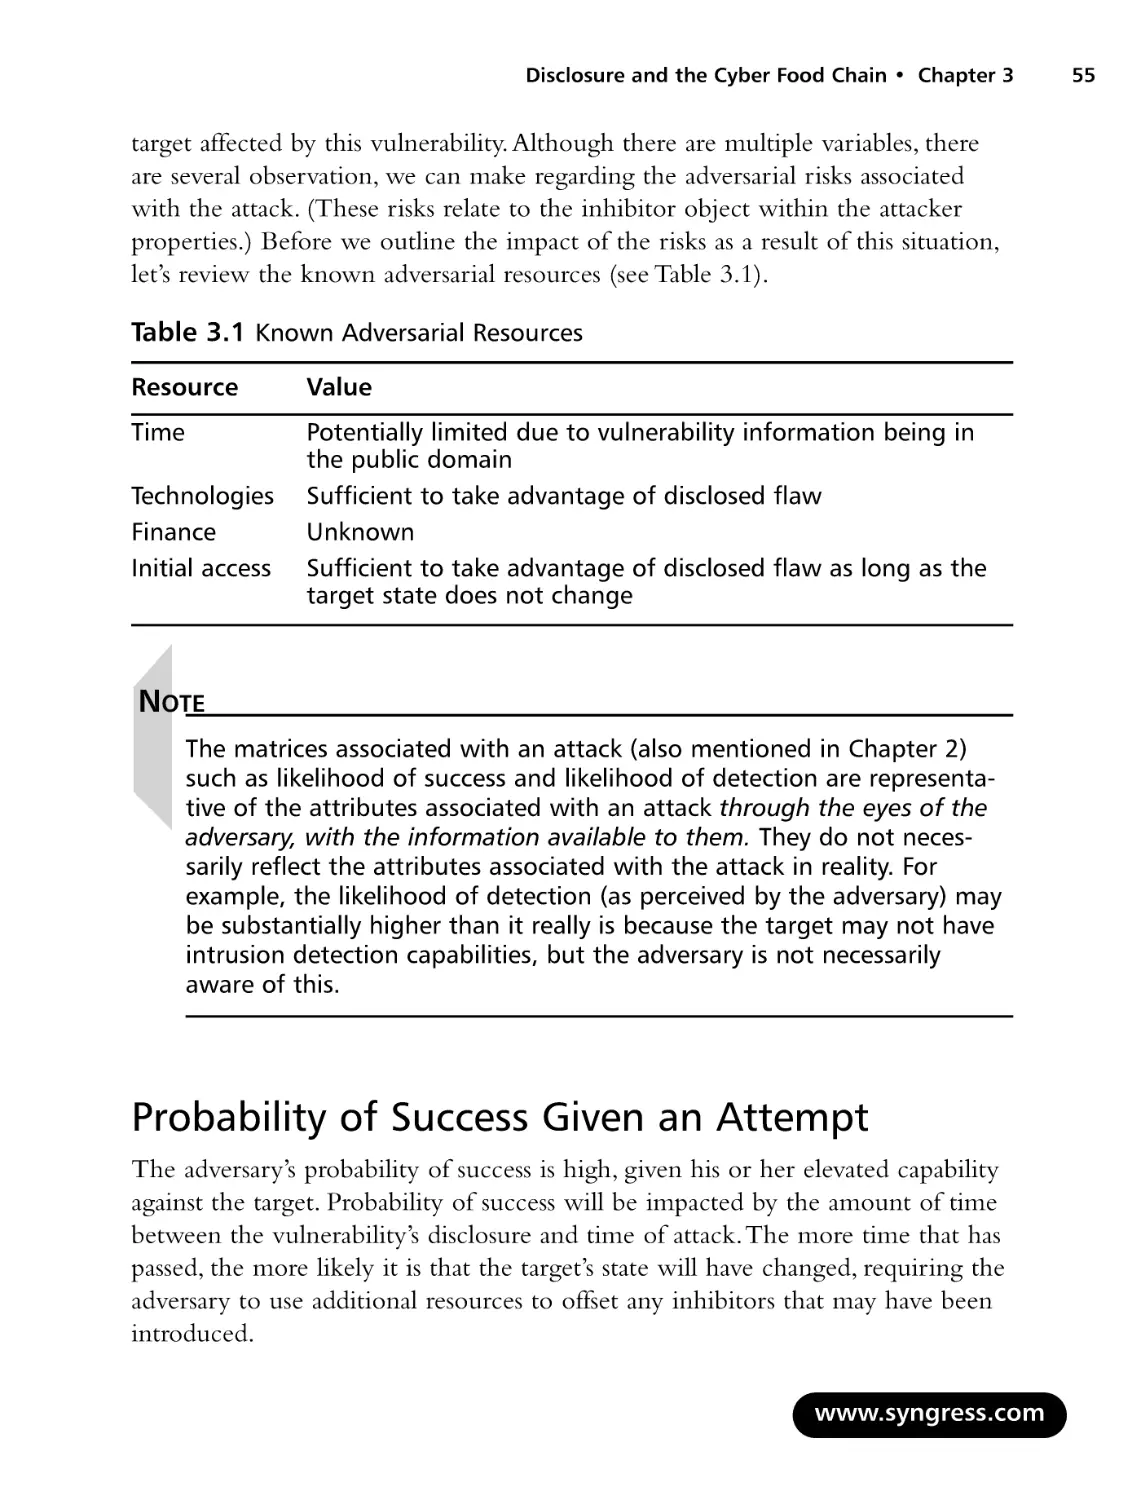 Probability of Success Given an Attempt